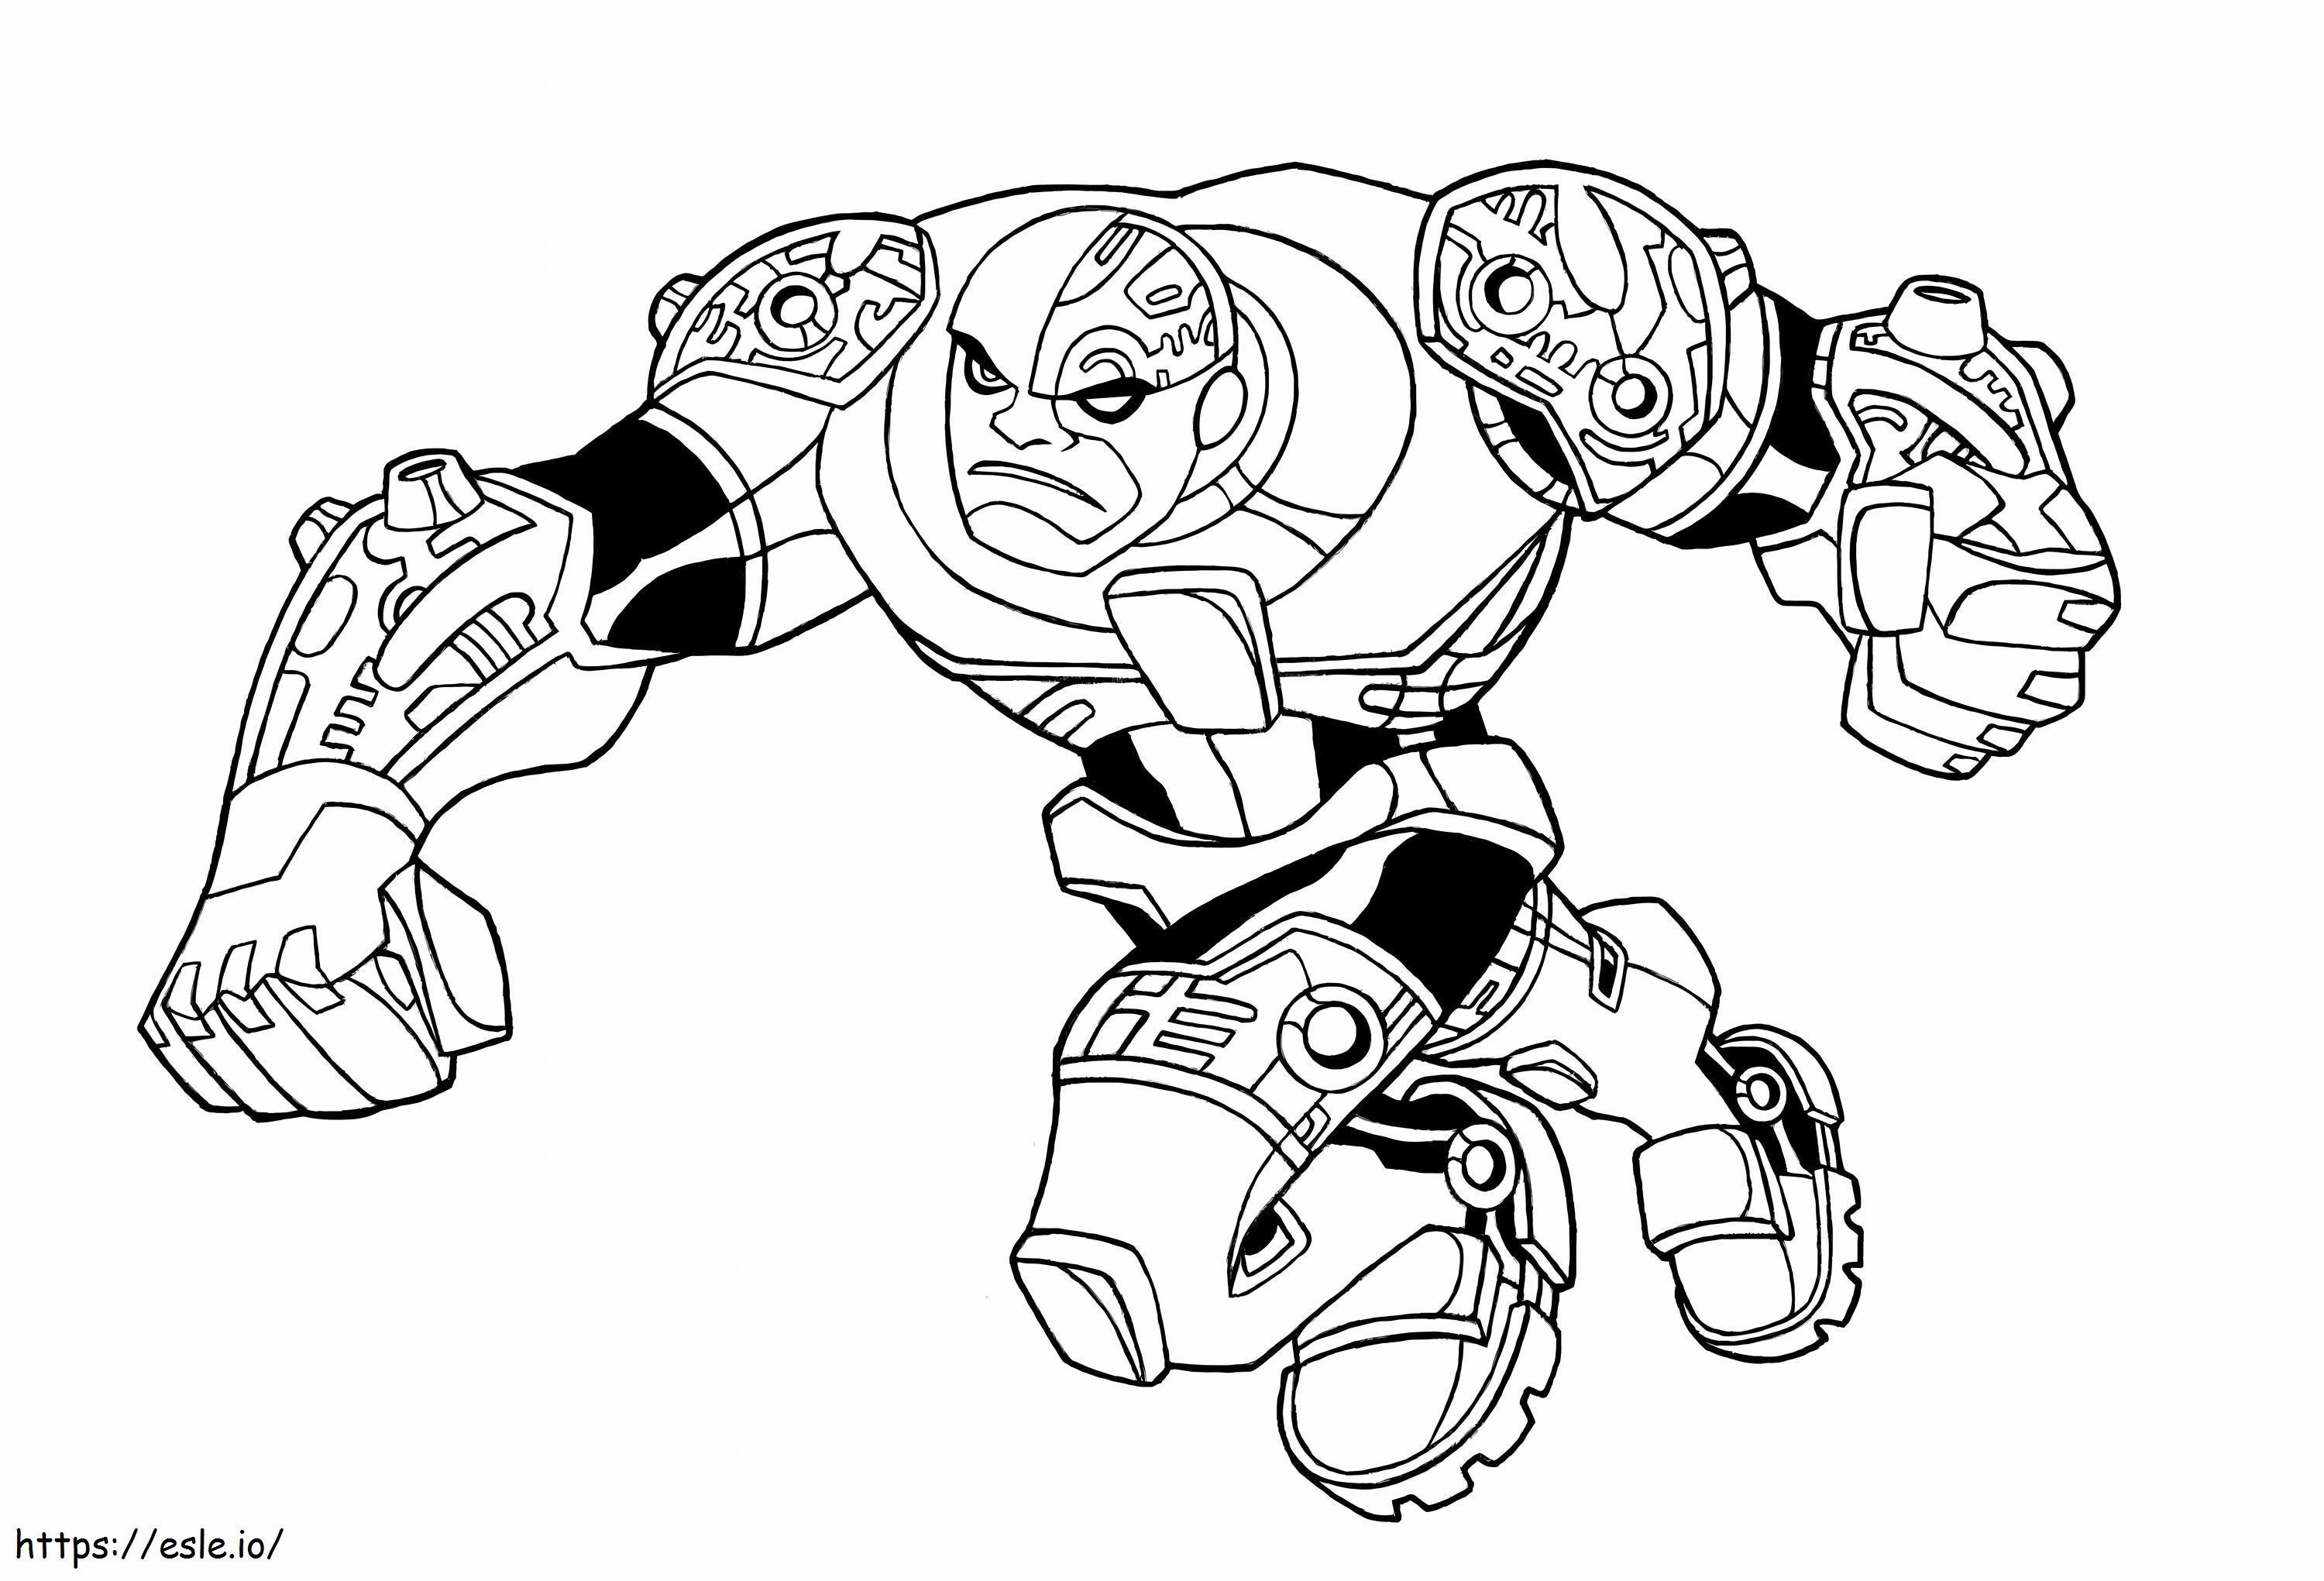 Angry Cyborg coloring page